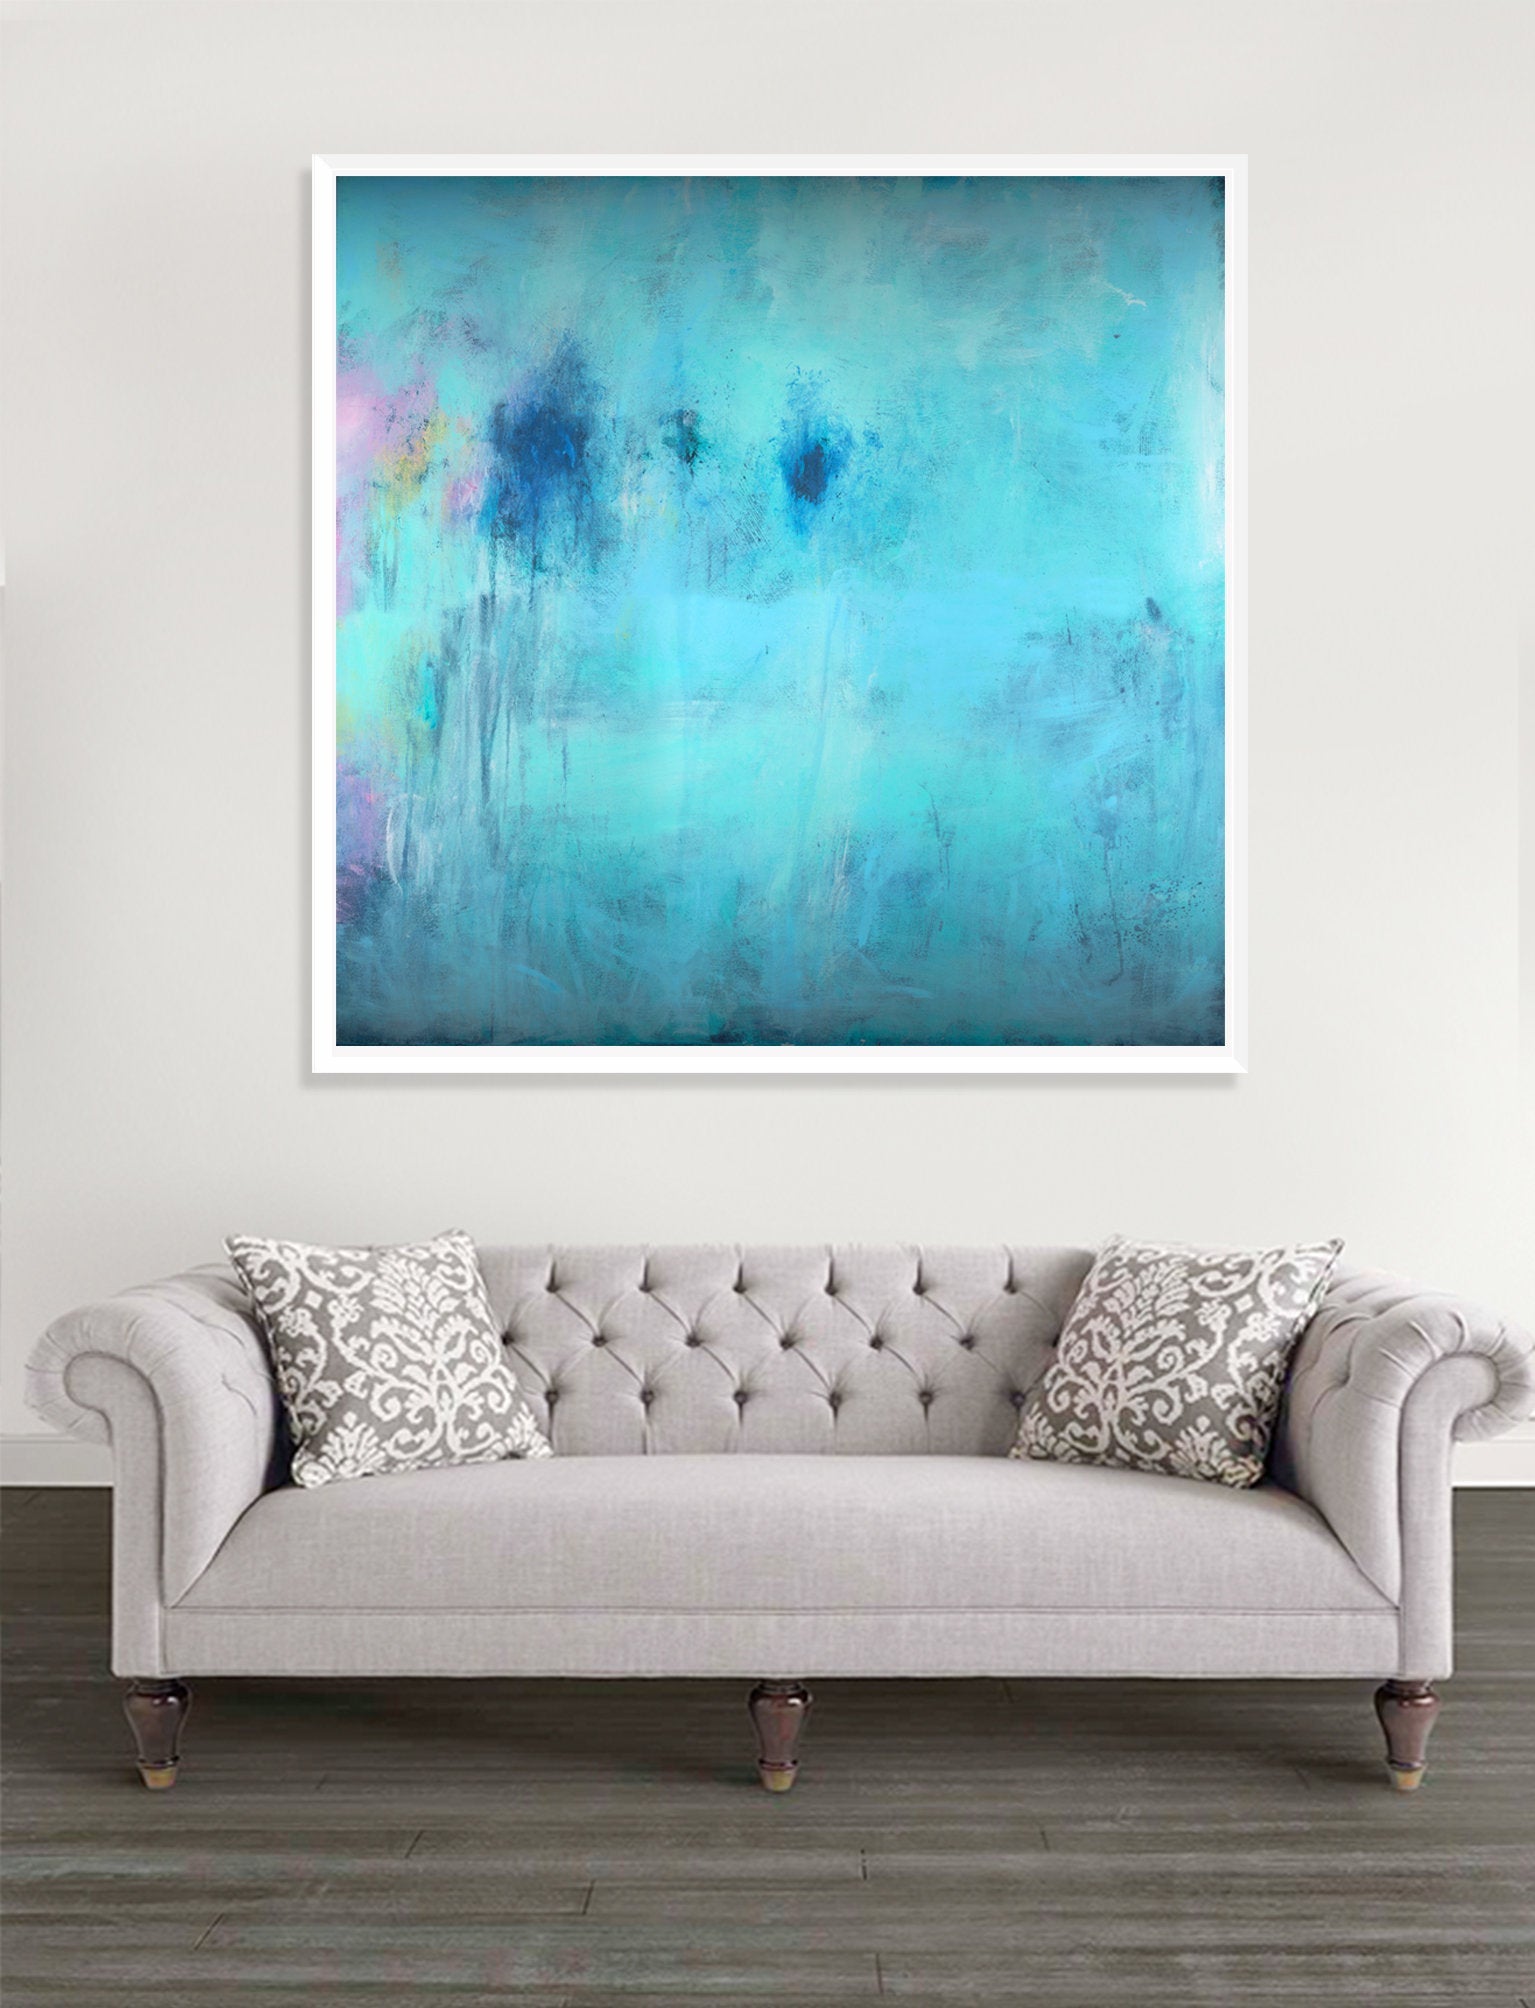 Abstract Print, abstract painting, Teal And Blue, Architecture Art, Modern Art, Apartment Decor, Living Room Wall Art, Large Print - camilomattis.com